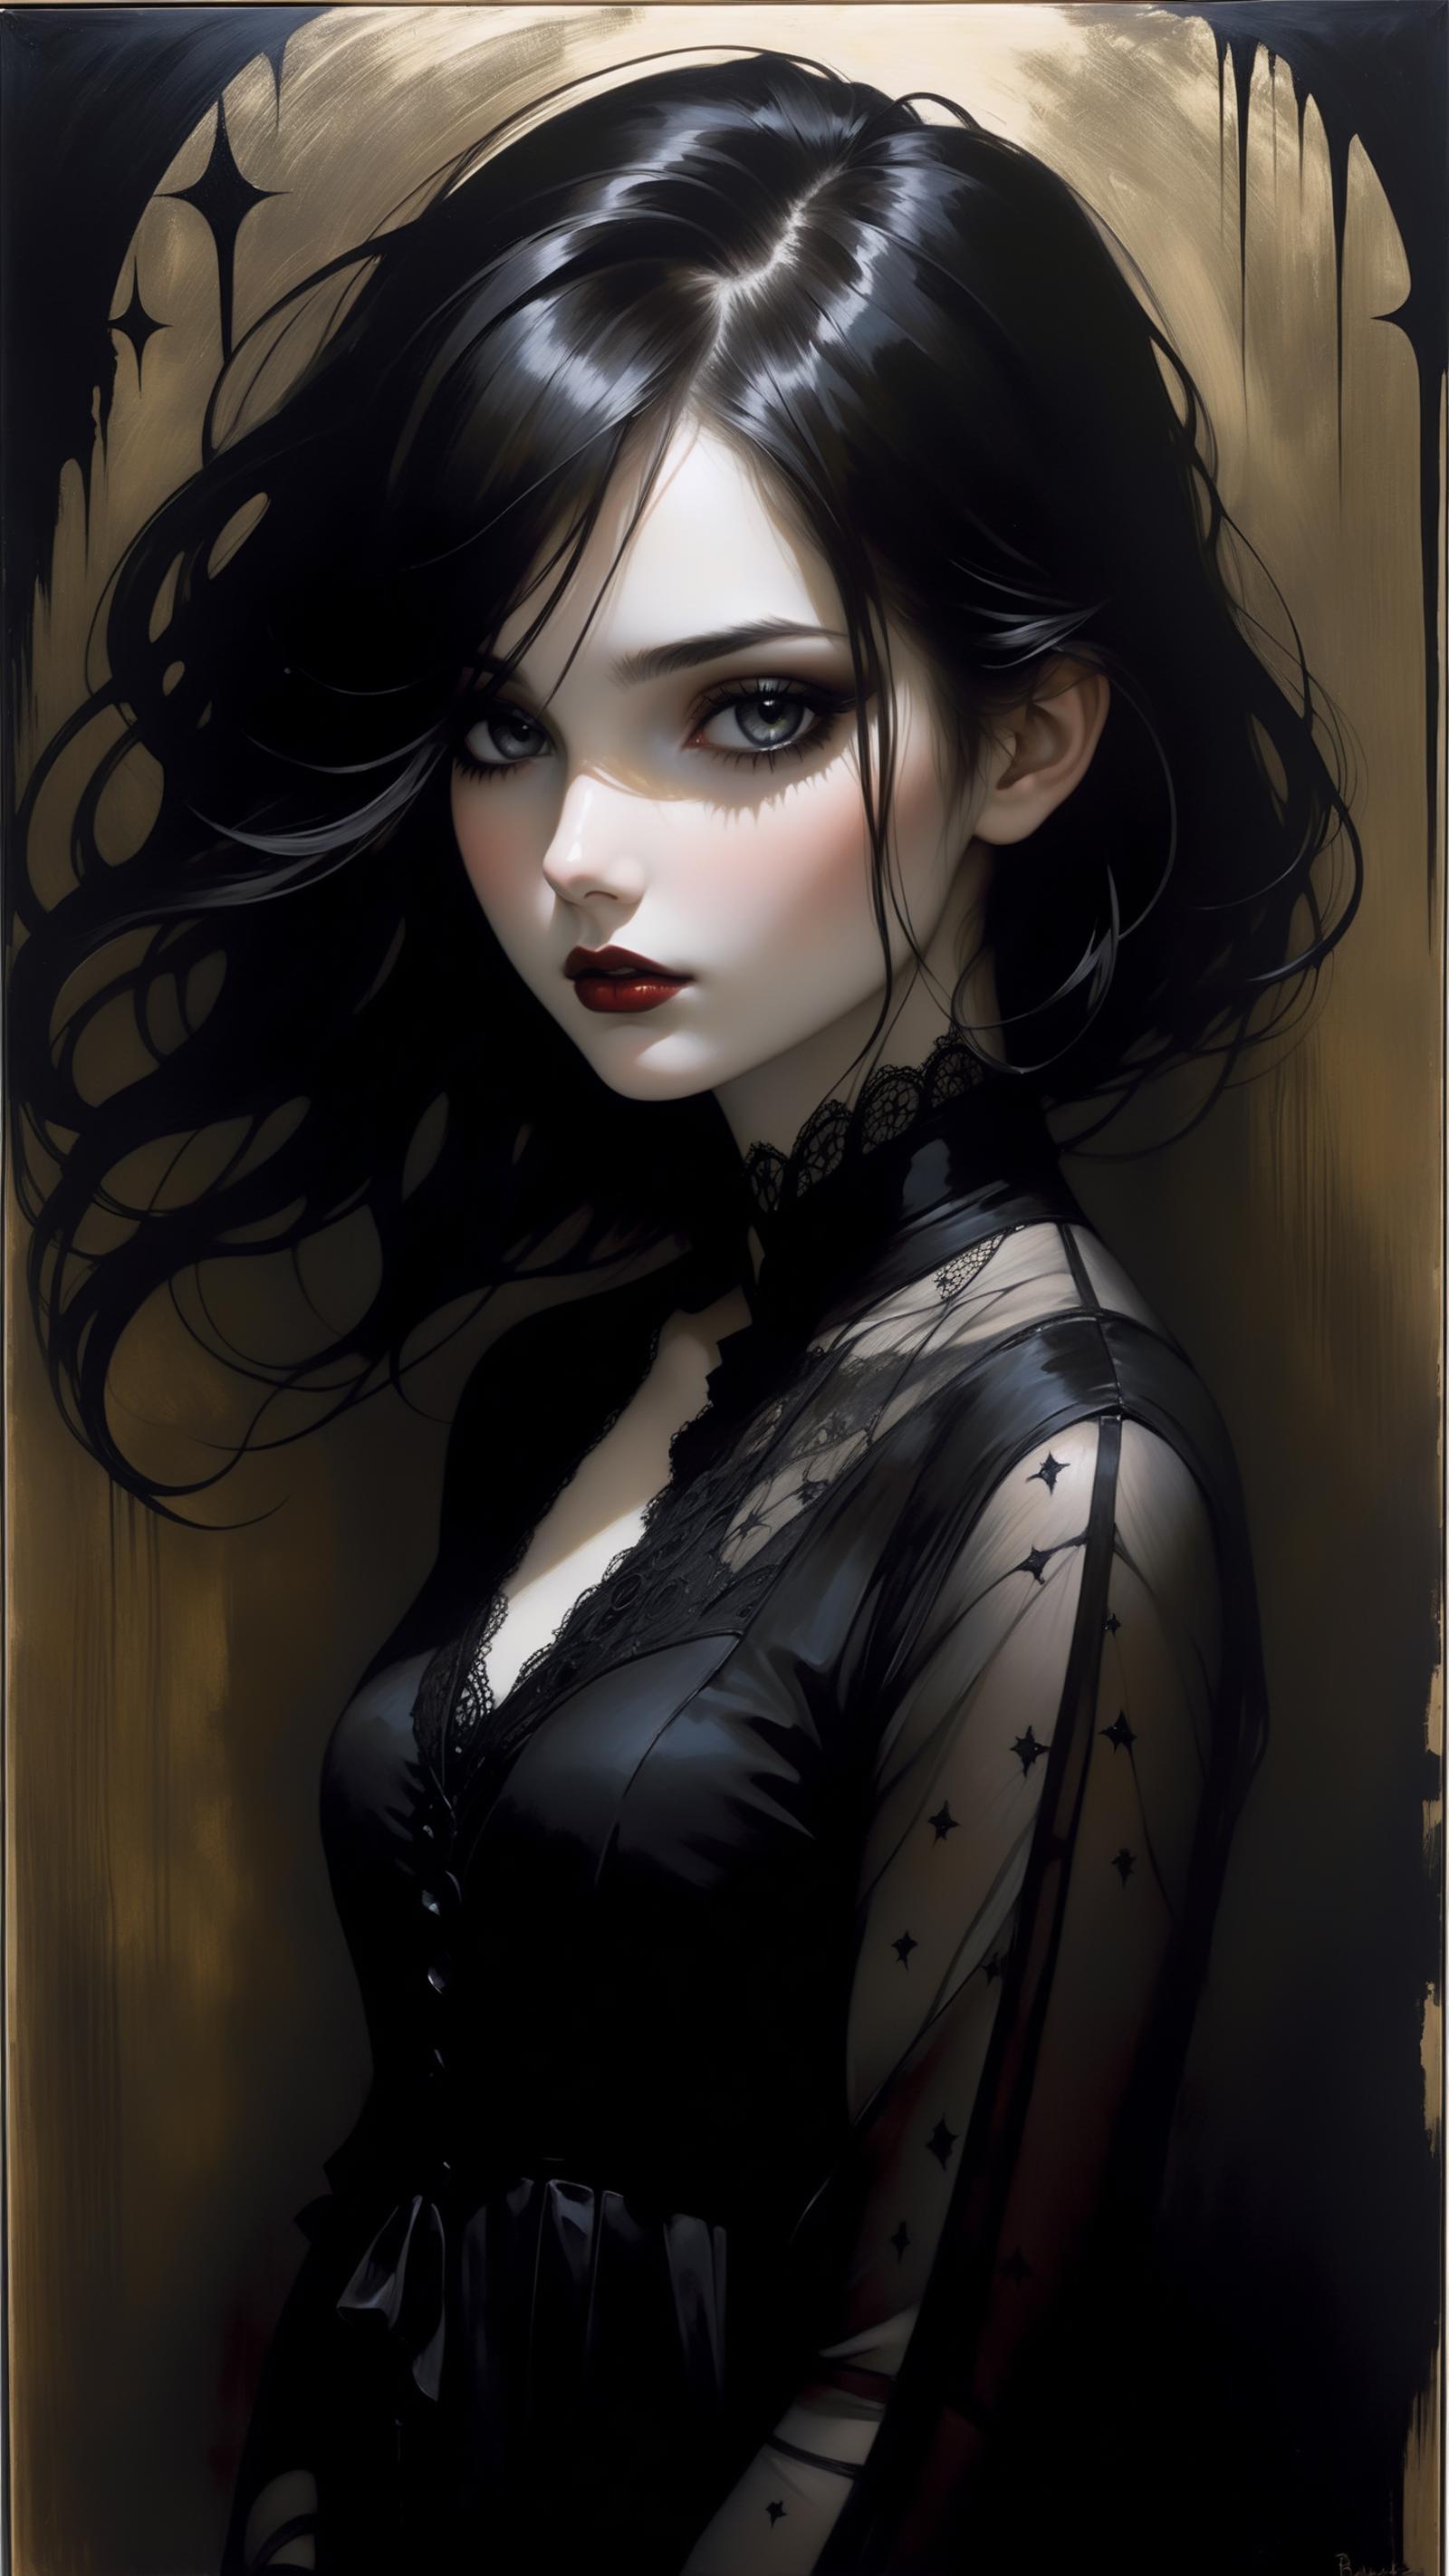 Artistic Portrait of Woman with Long Dark Hair, Black Dress, and Black Lace.